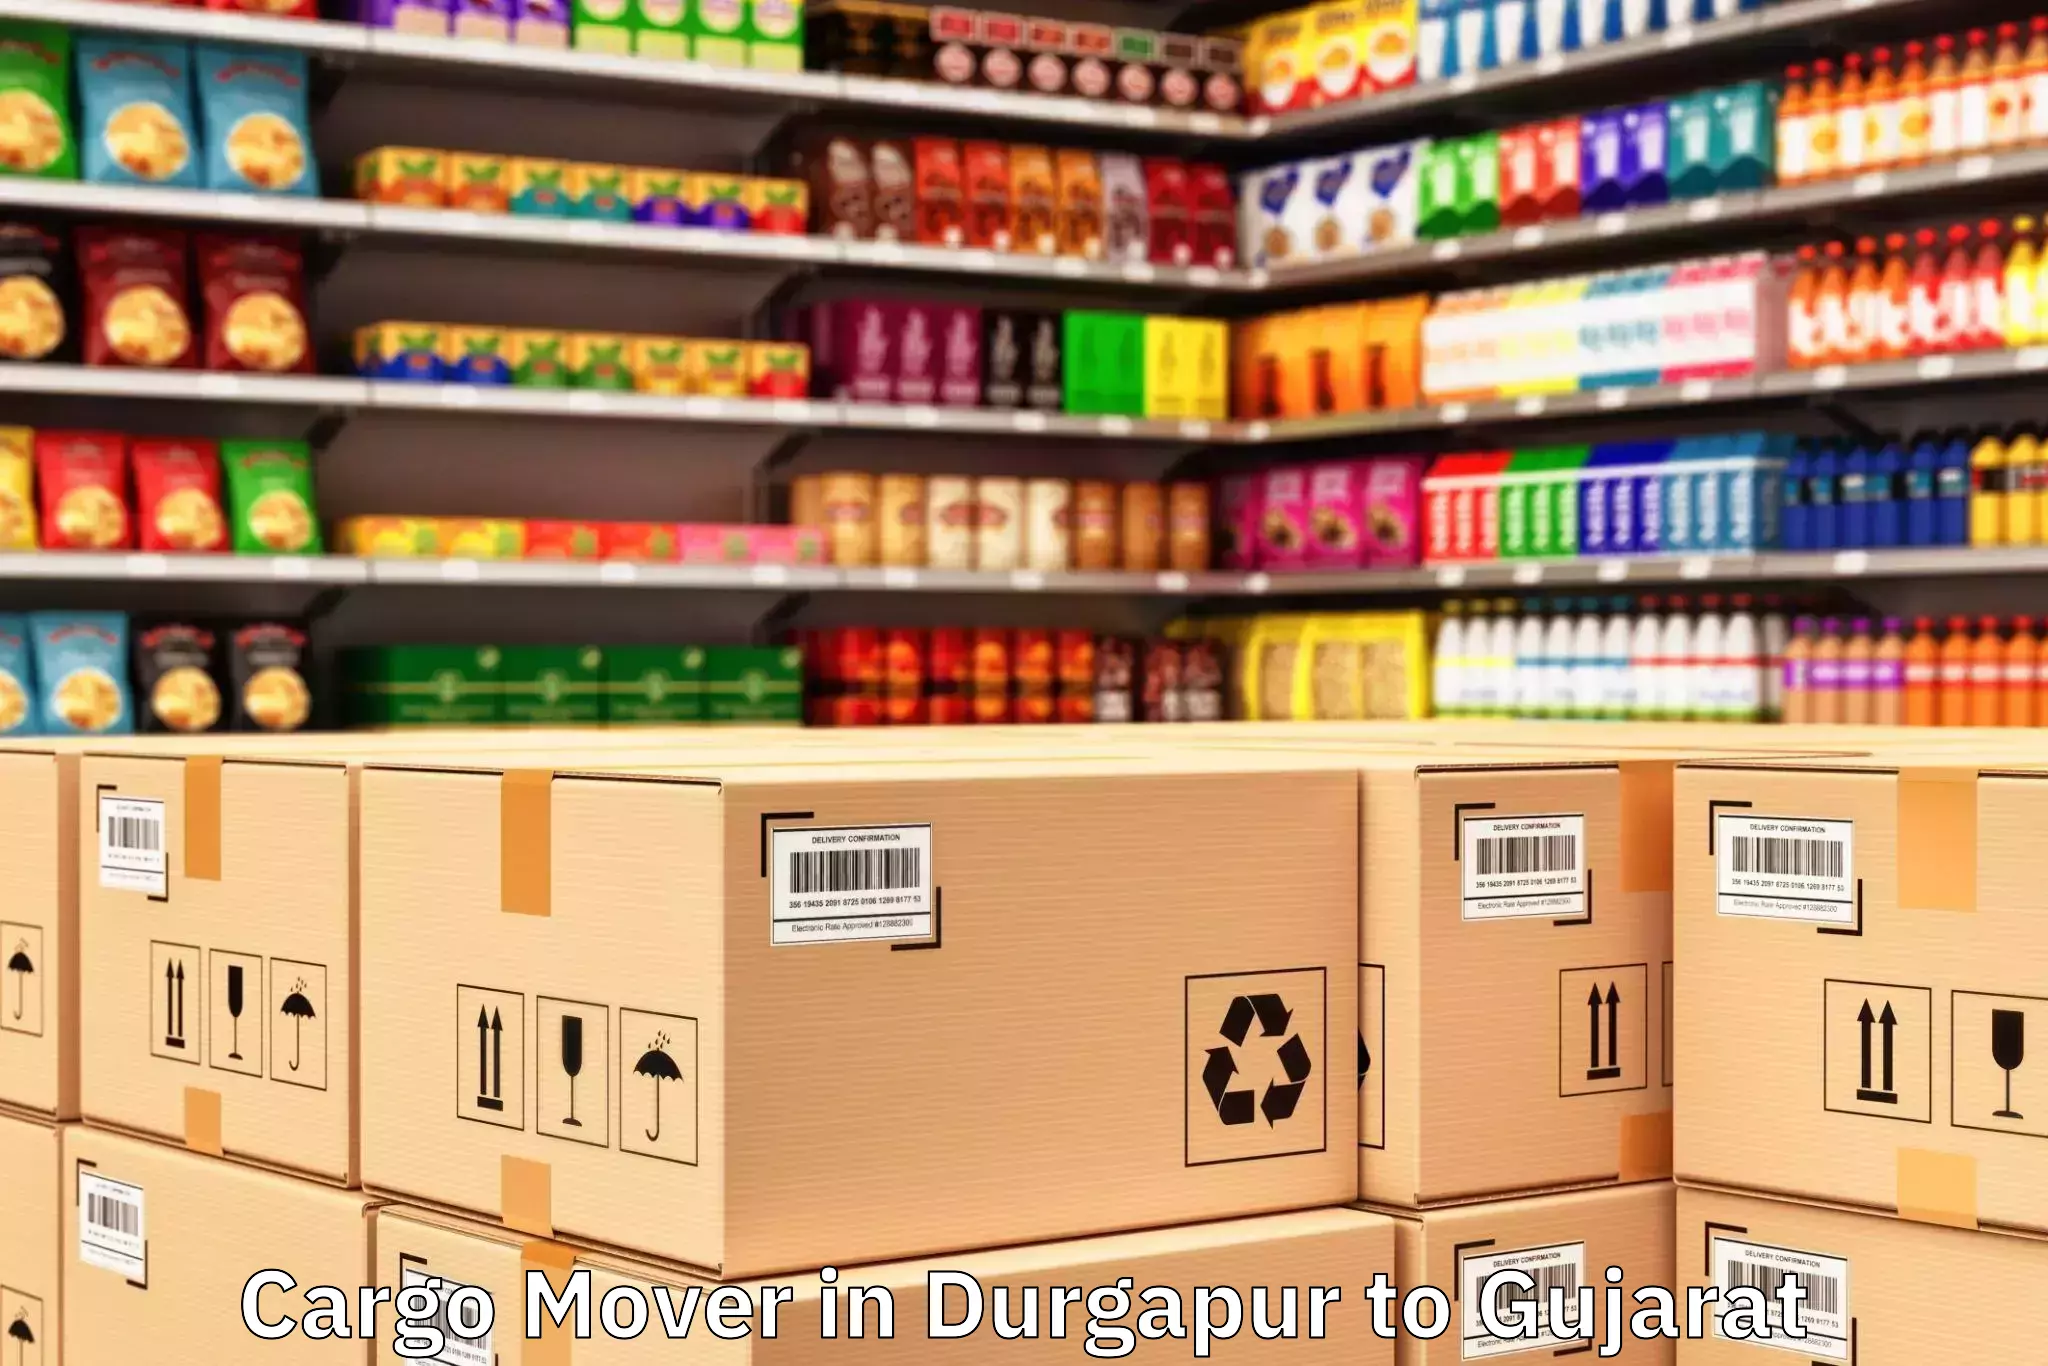 Top Durgapur to Lakhpat Cargo Mover Available